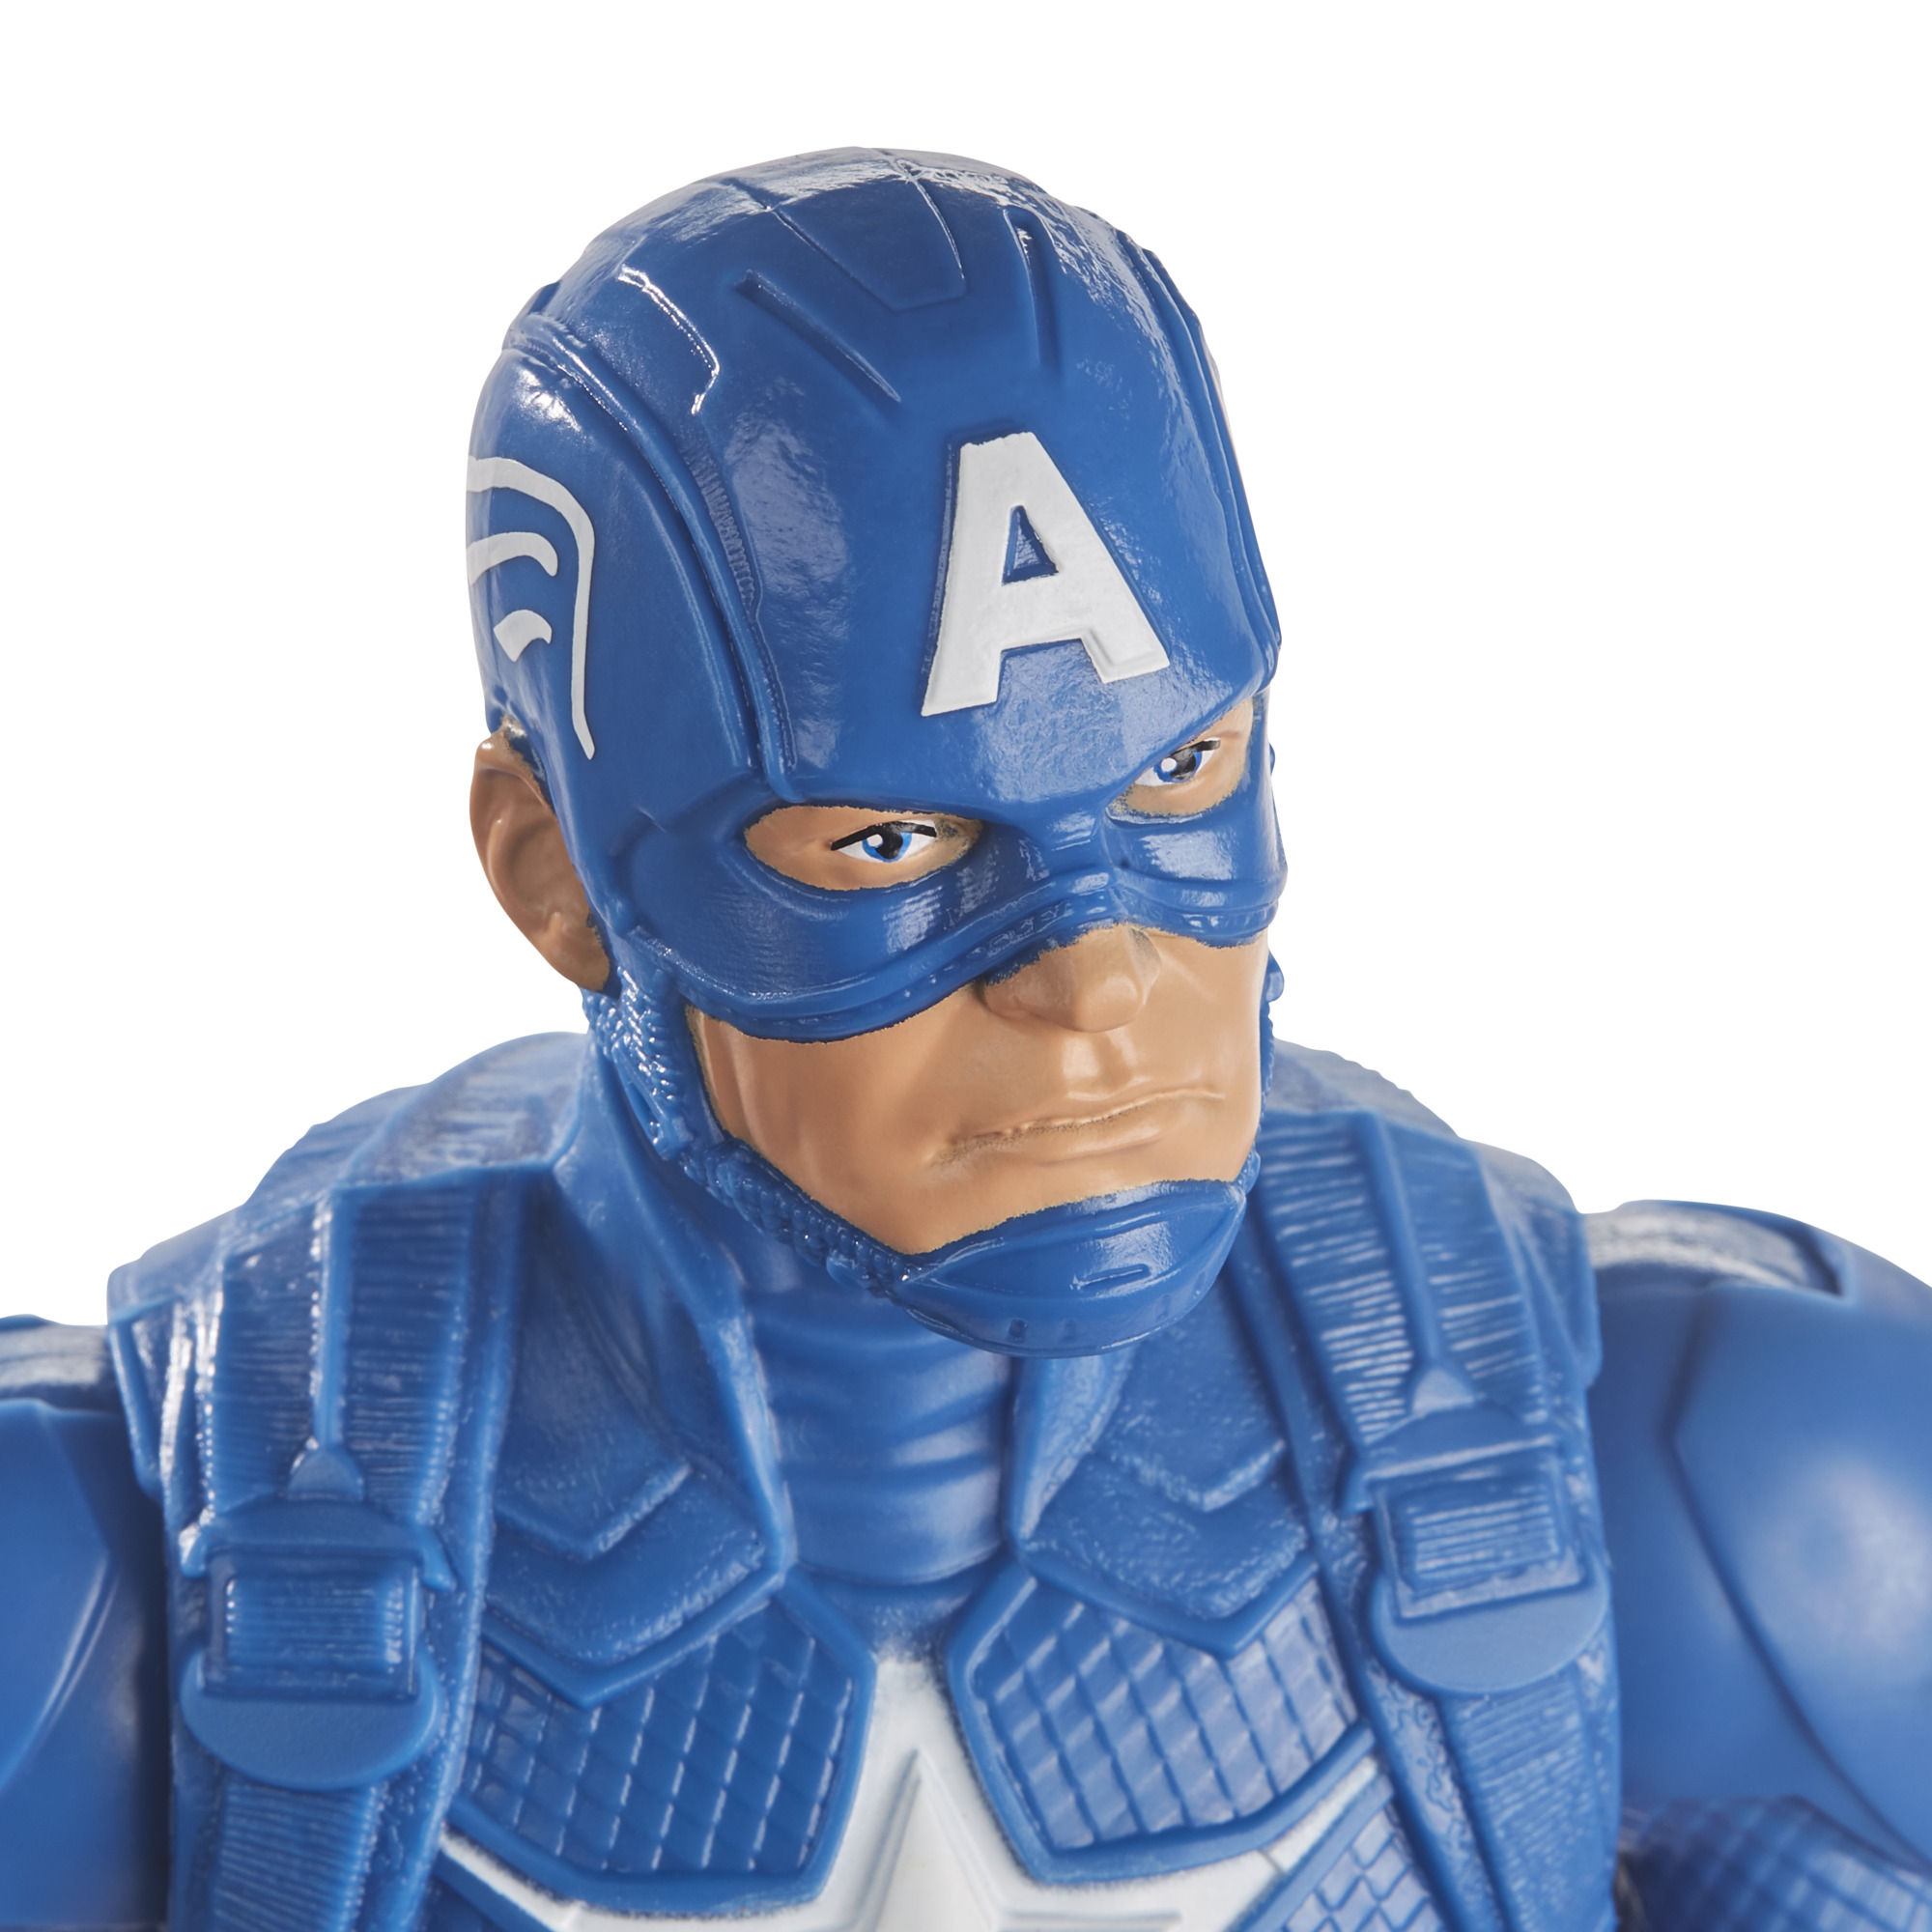 Marvel: Avengers Titan Hero Series Captain America Kids Toy Action Figure for Boys and Girls Ages 4 5 6 7 8 and Up (12”) - image 5 of 8